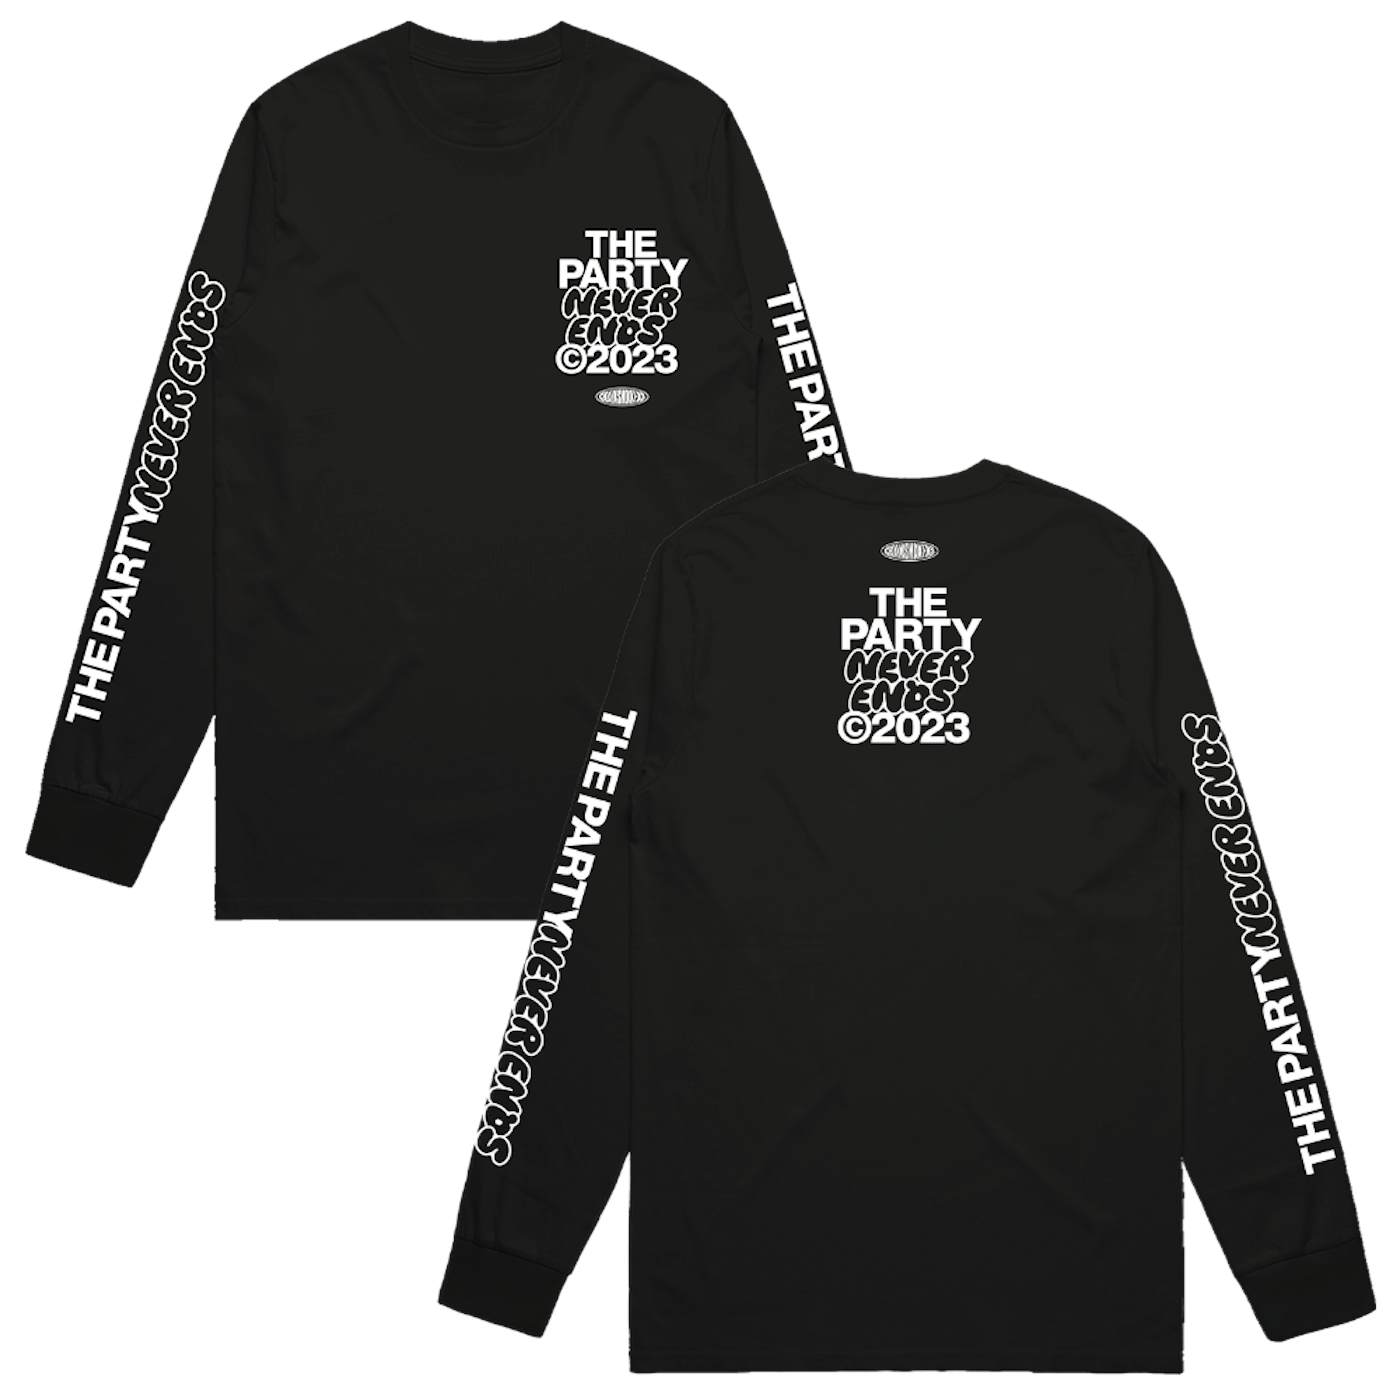 The Chainsmokers The Party Never Ends - Long Sleeve Tee